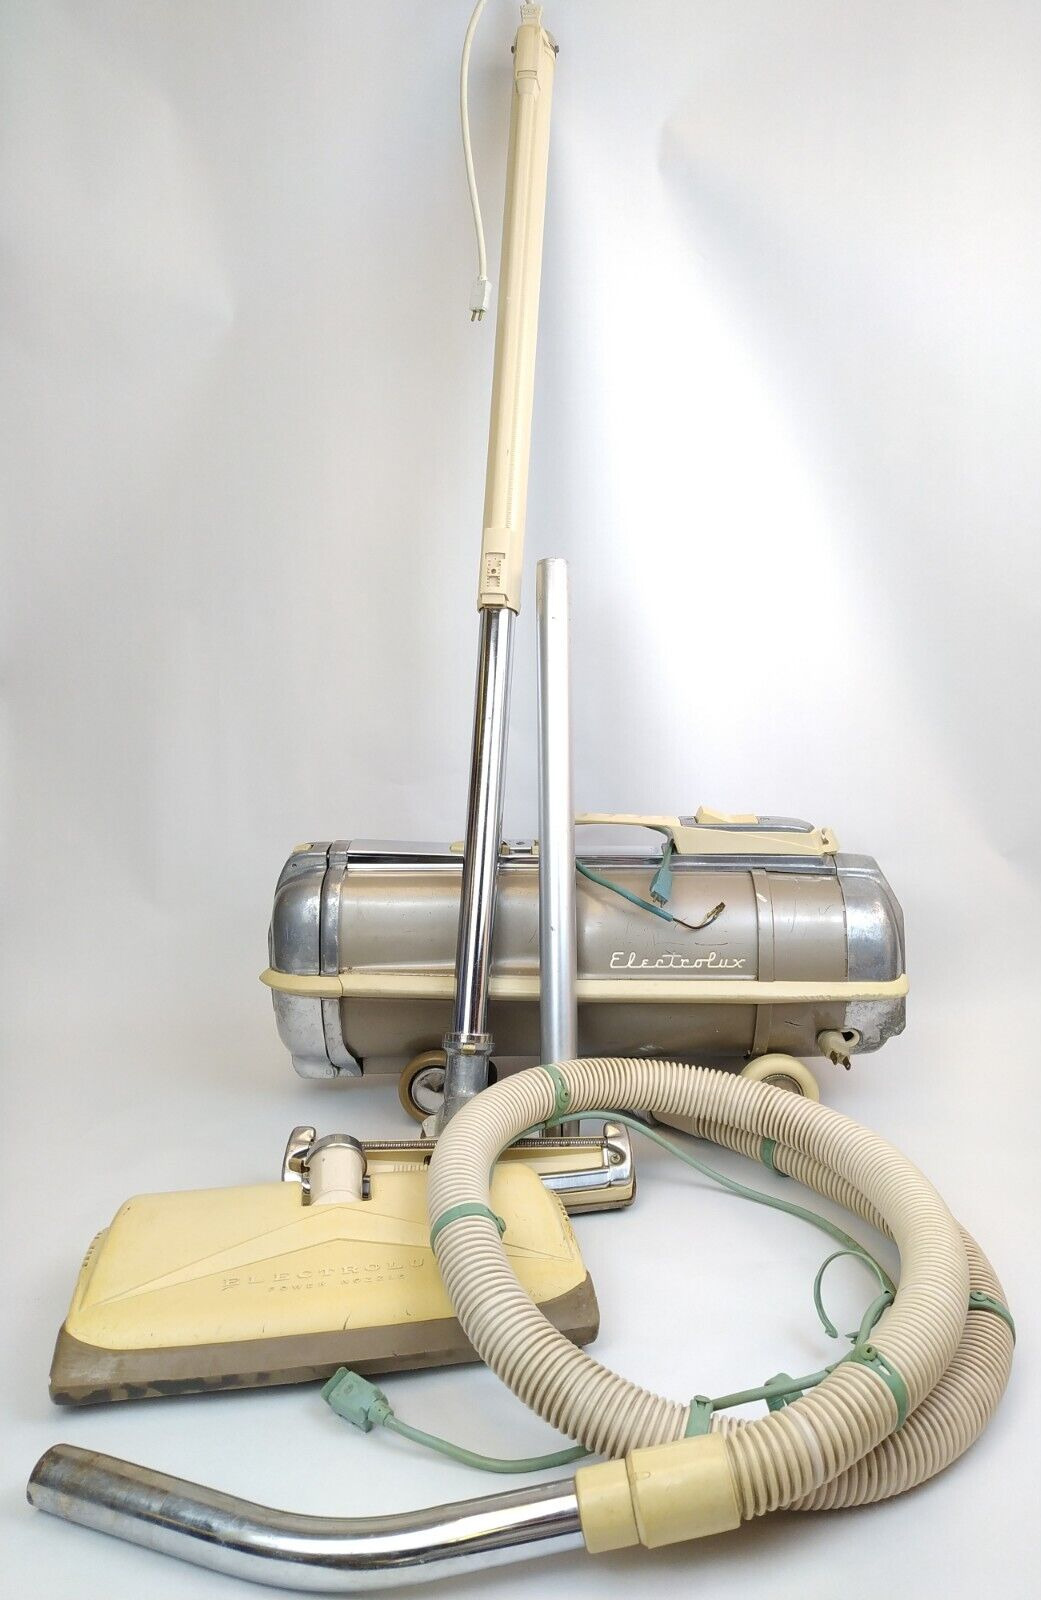 Electrolux Automatic Model G Tan Canister Vacuum PN-1 Powerhead/Hose/Attachments